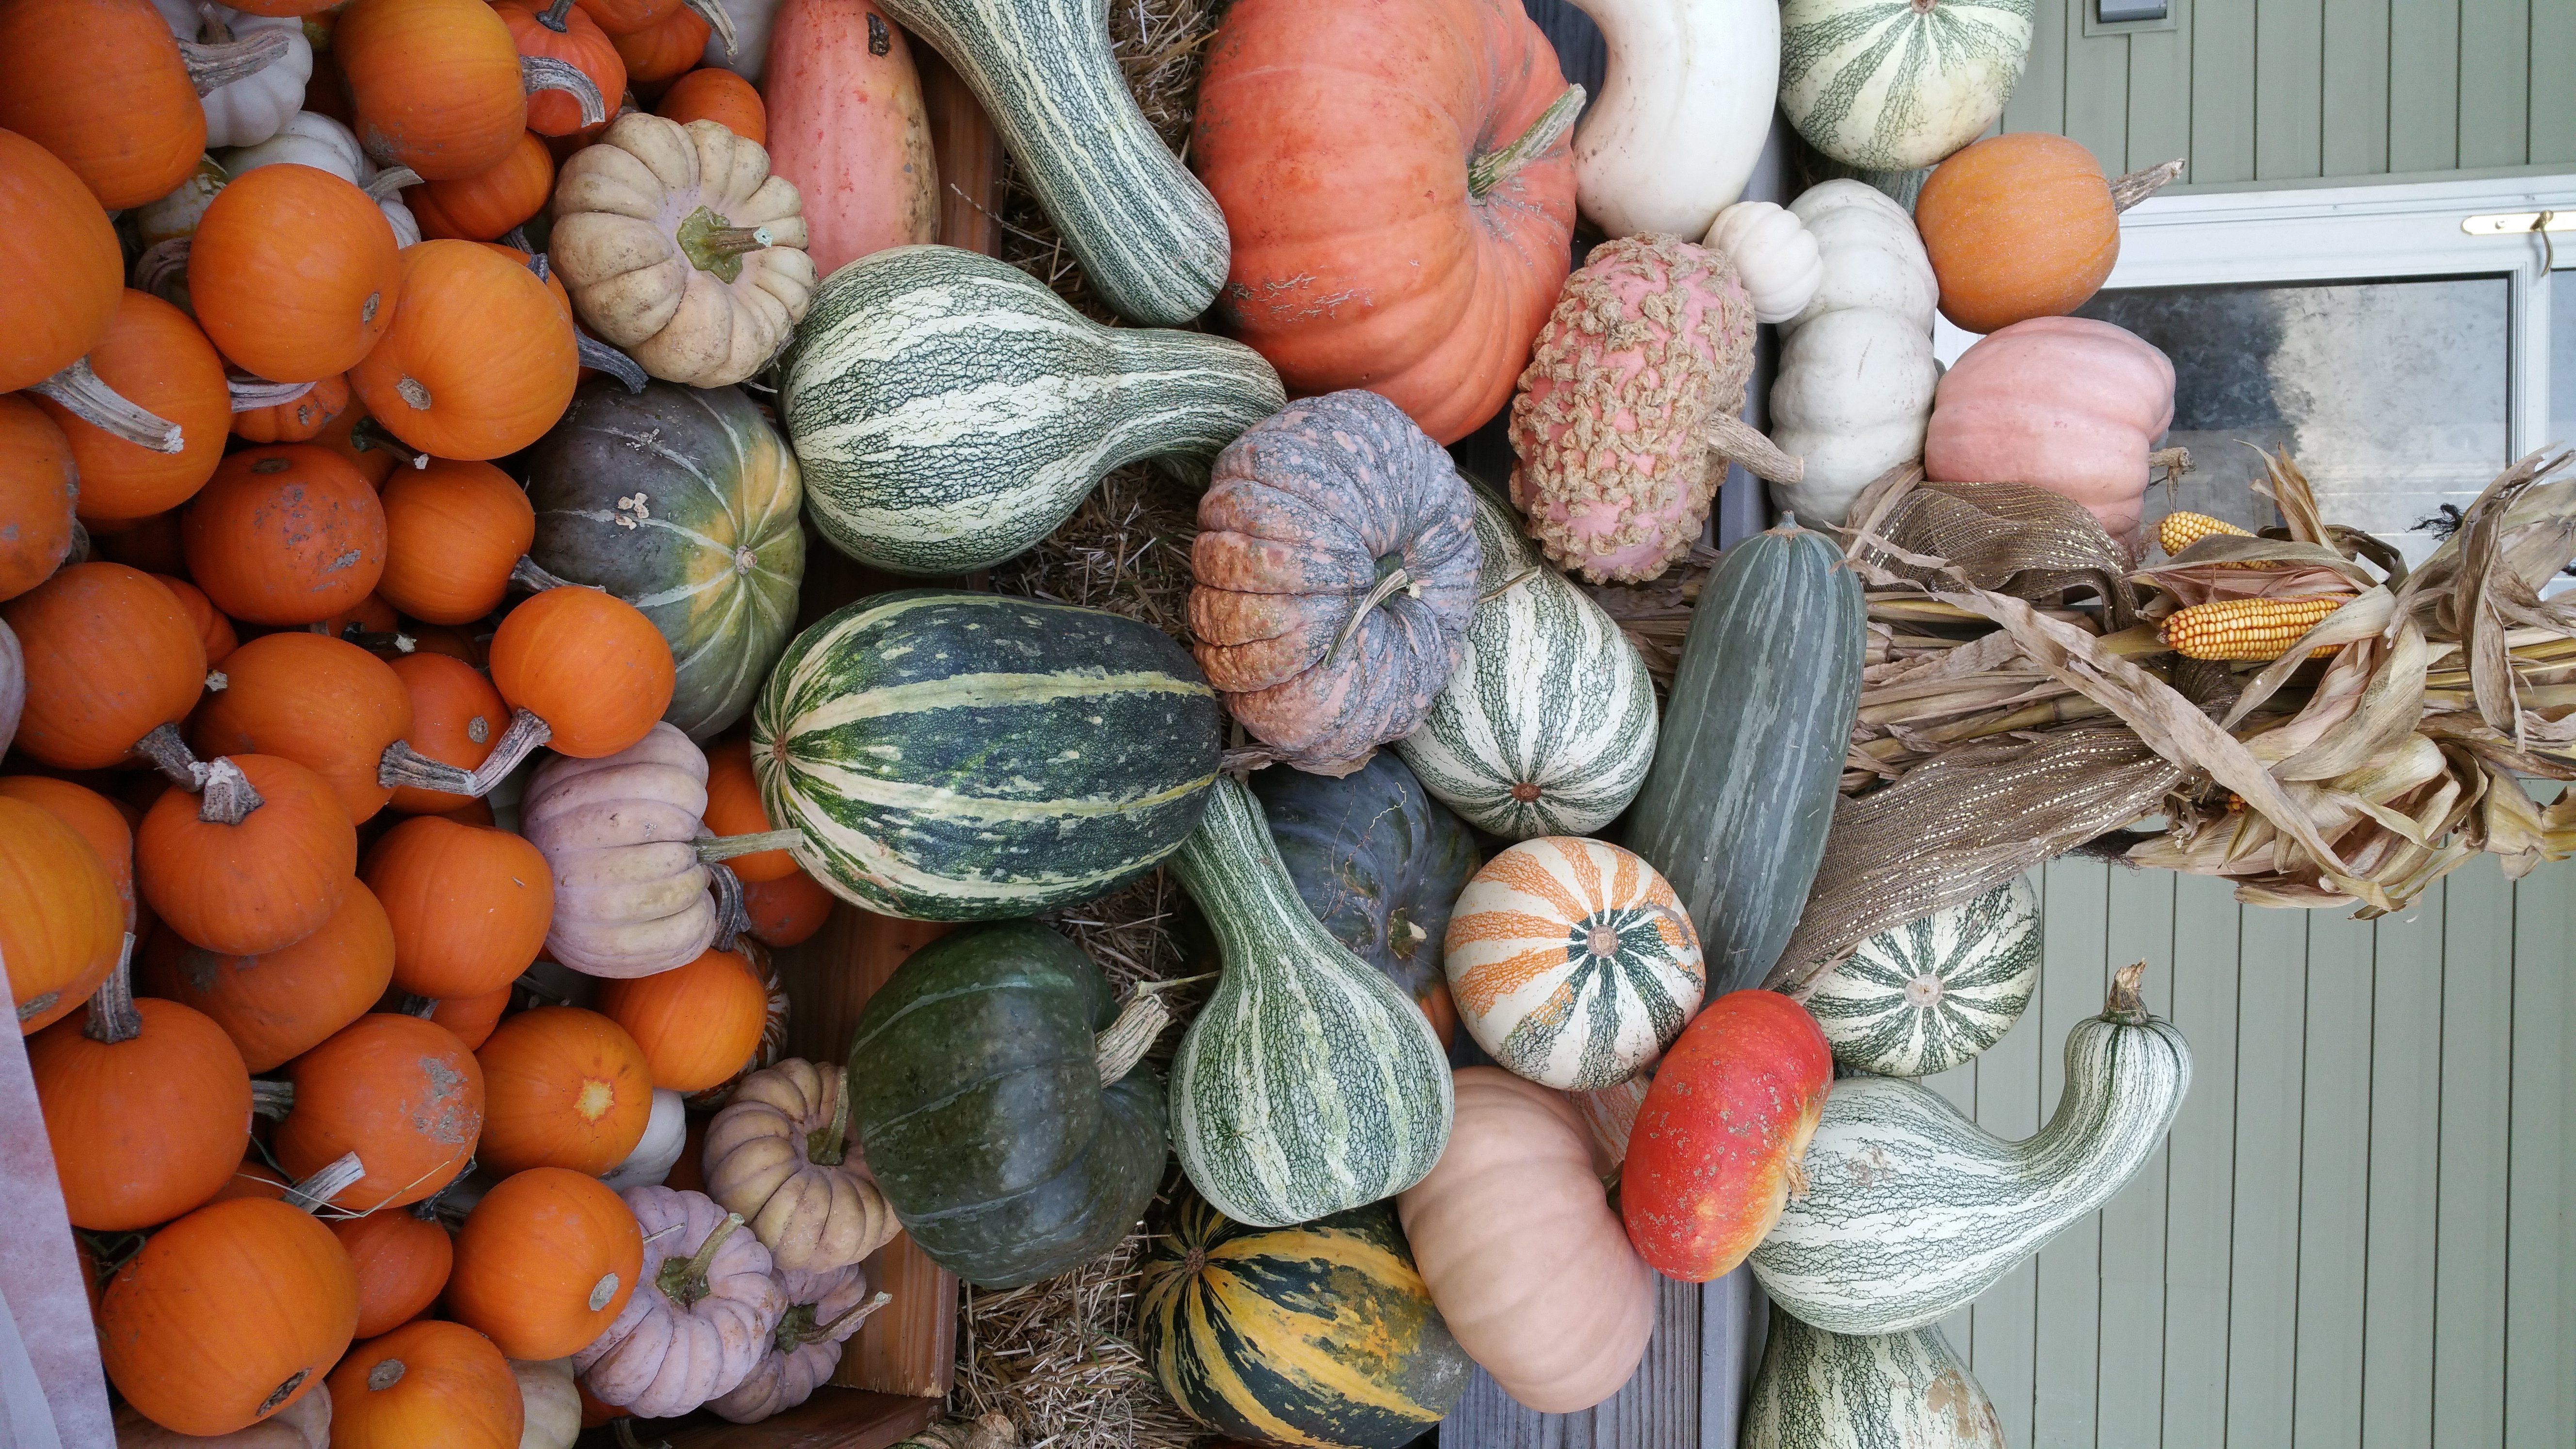 Previous Happening: Winter Squash is here